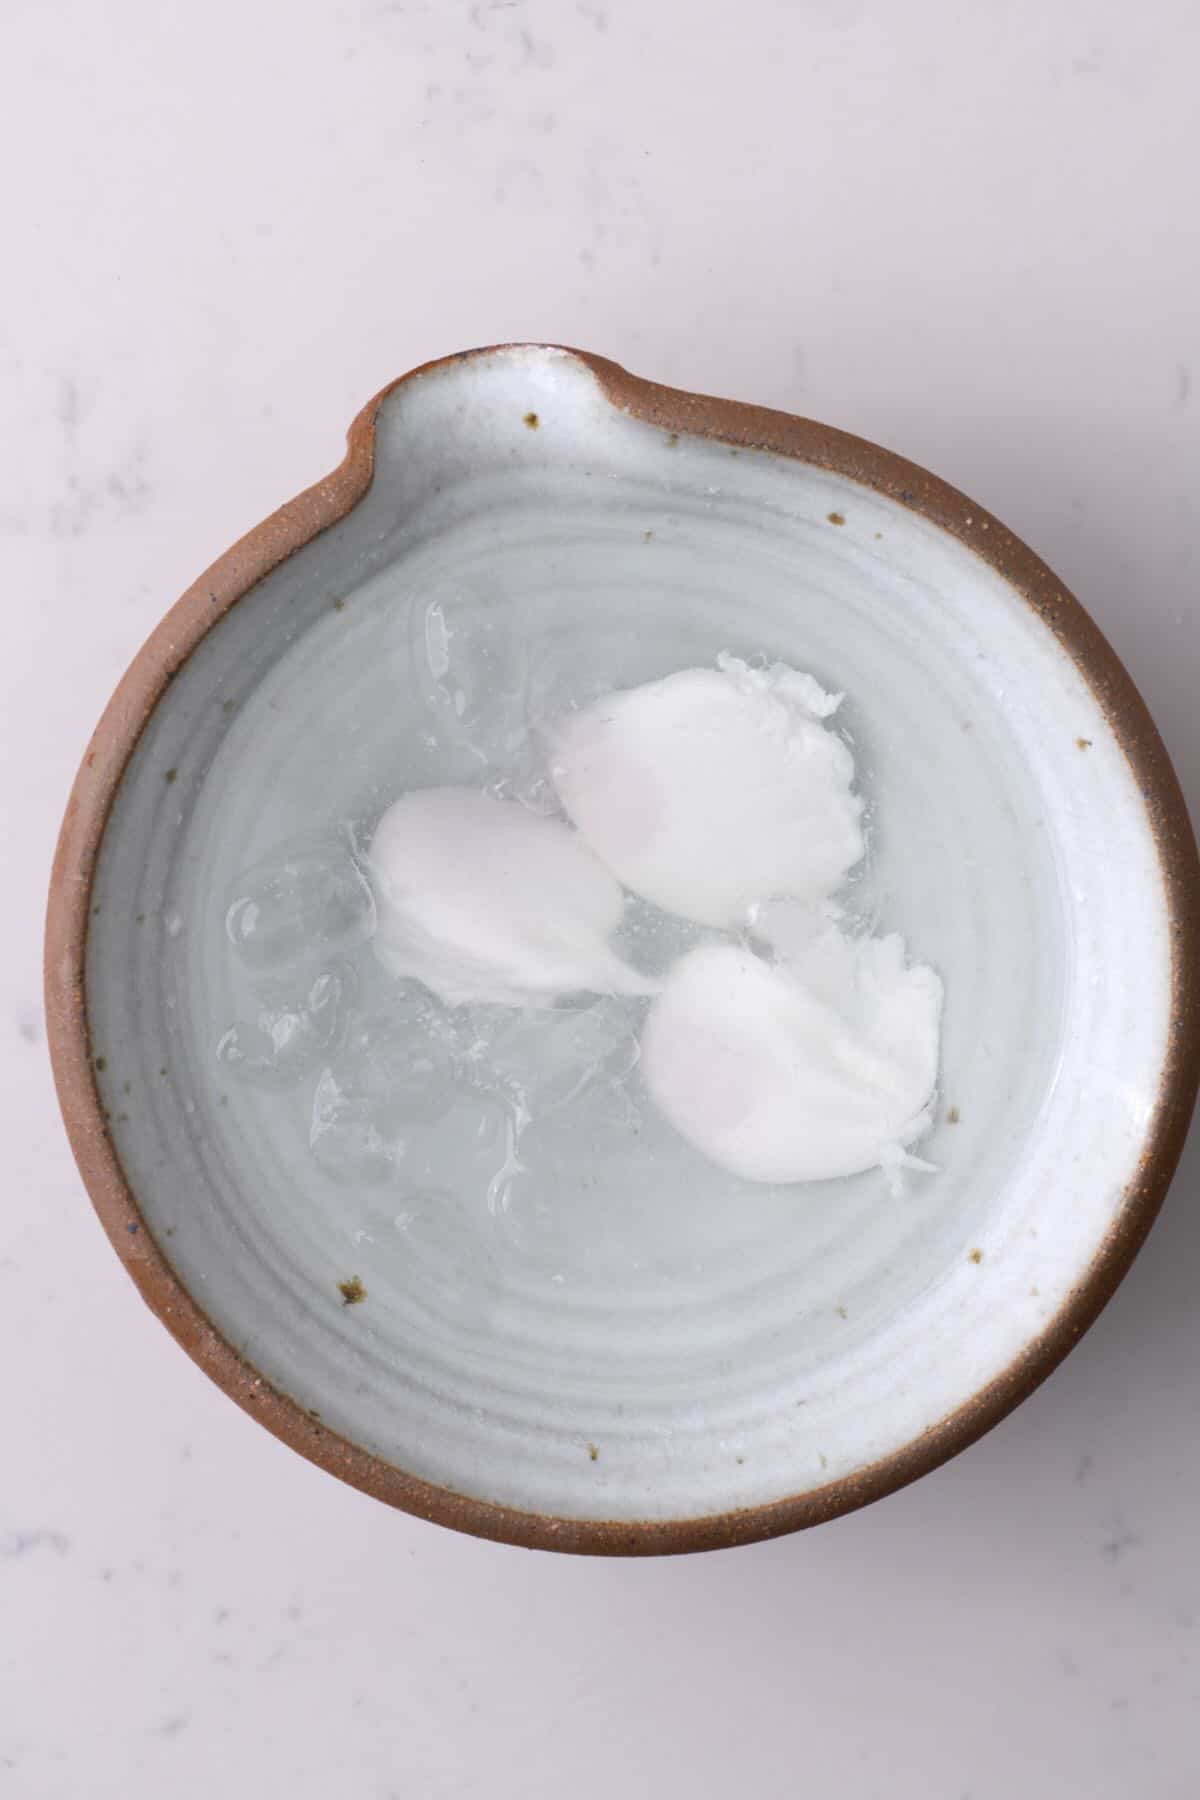 Three poached eggs in an ice bath